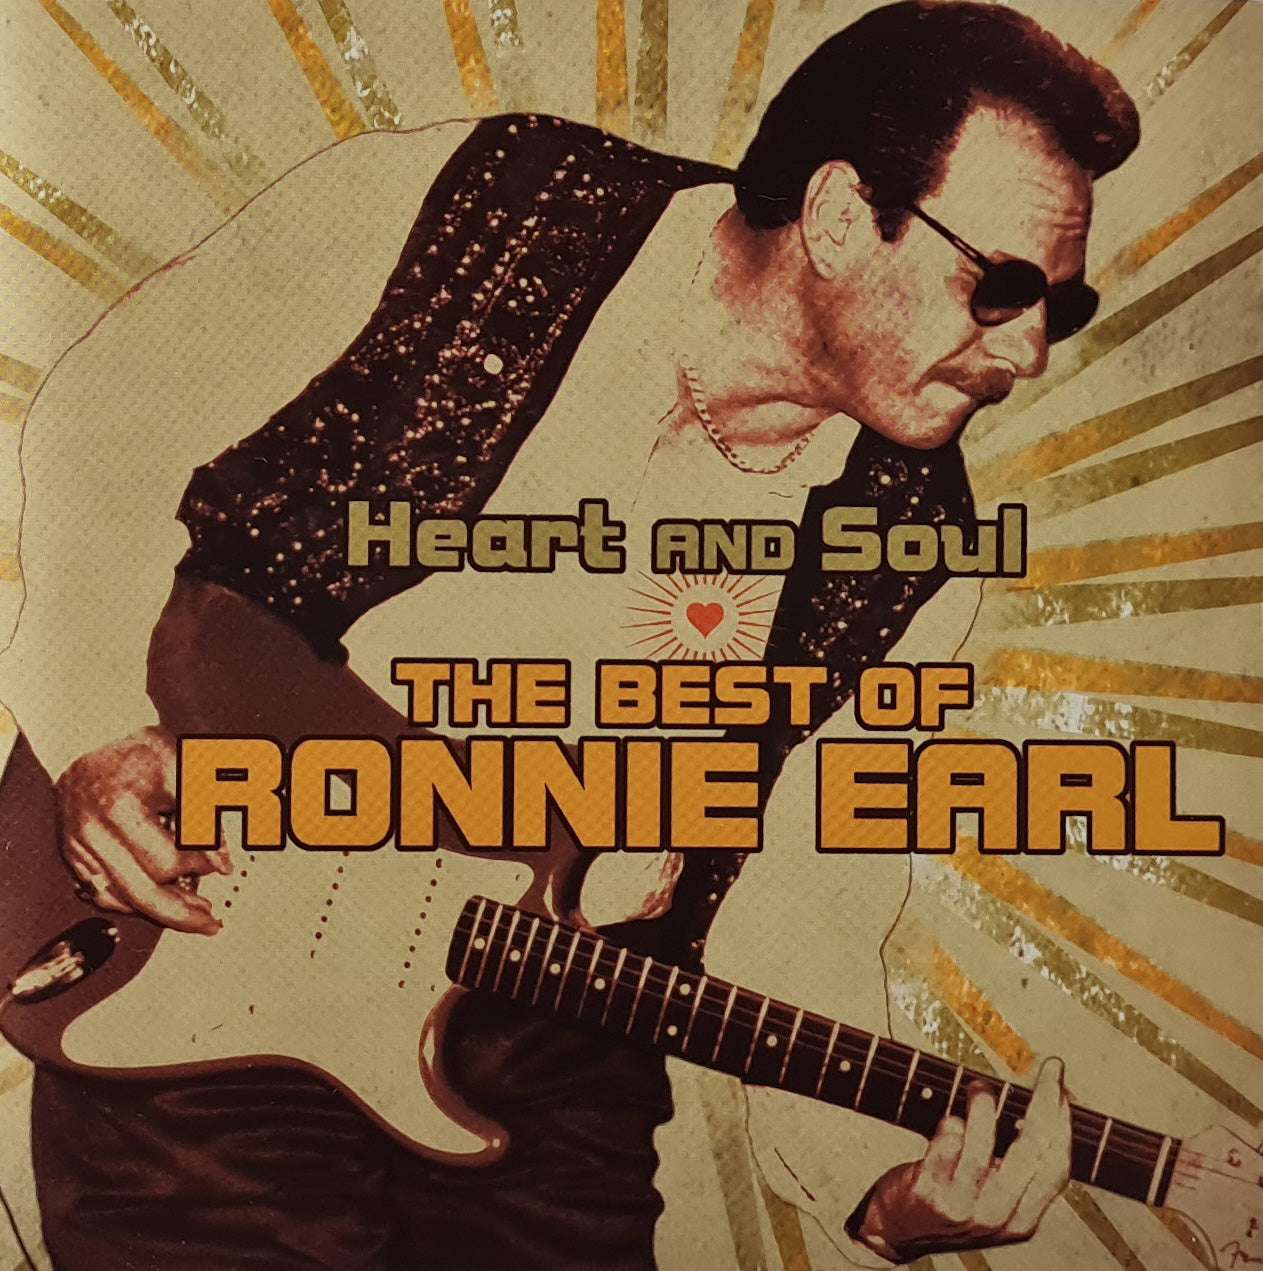 Ronnie Earl - Heart and Soul The Best of (CD)